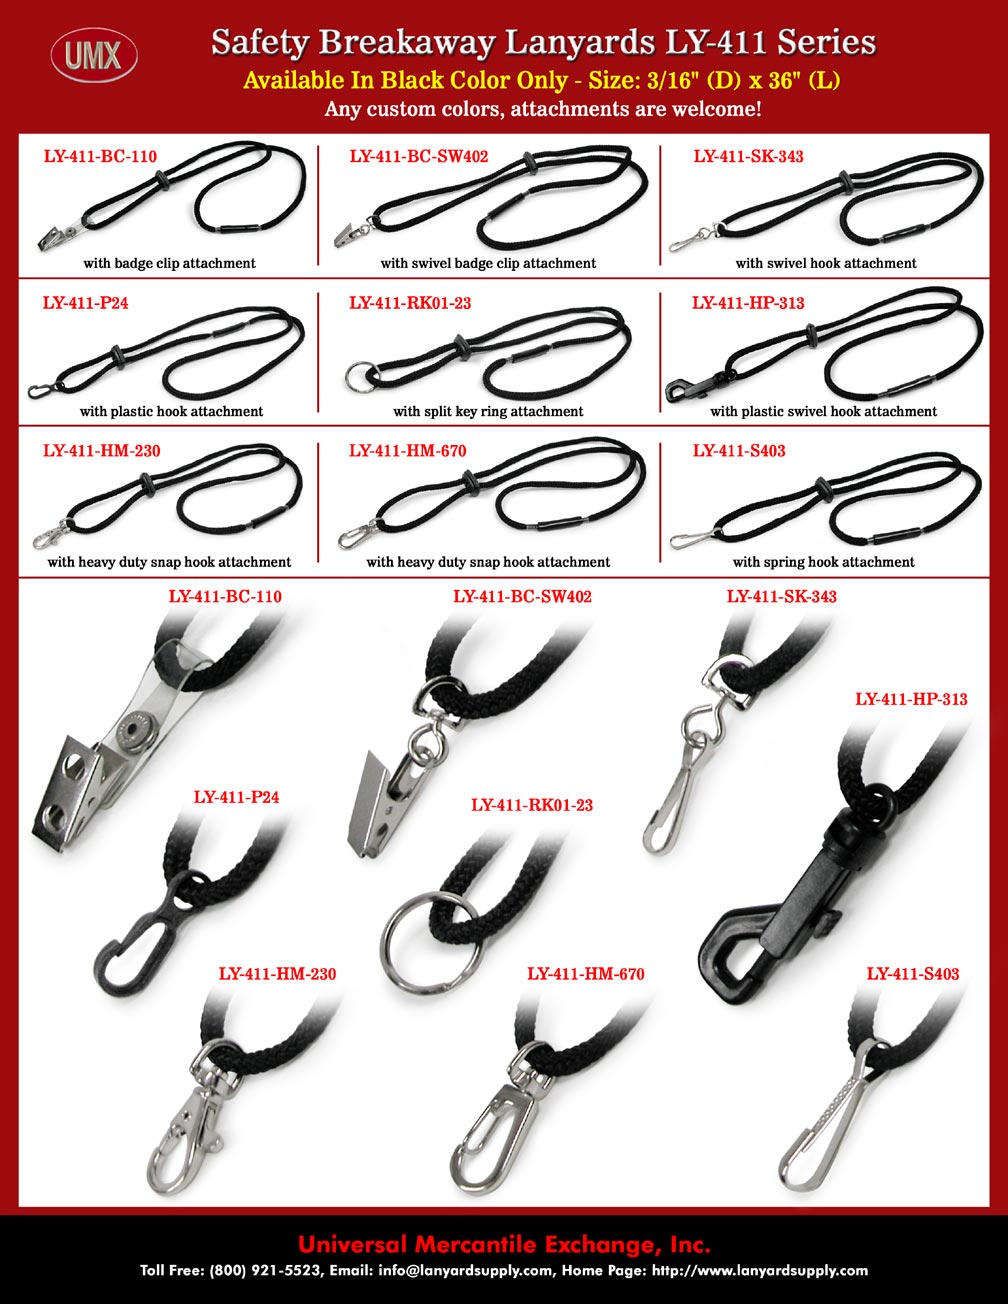 Rubber Tube Safety lanyards, Breakaway Rubber Tube Lanyards, Heavy Duty Safety Lanyard Series